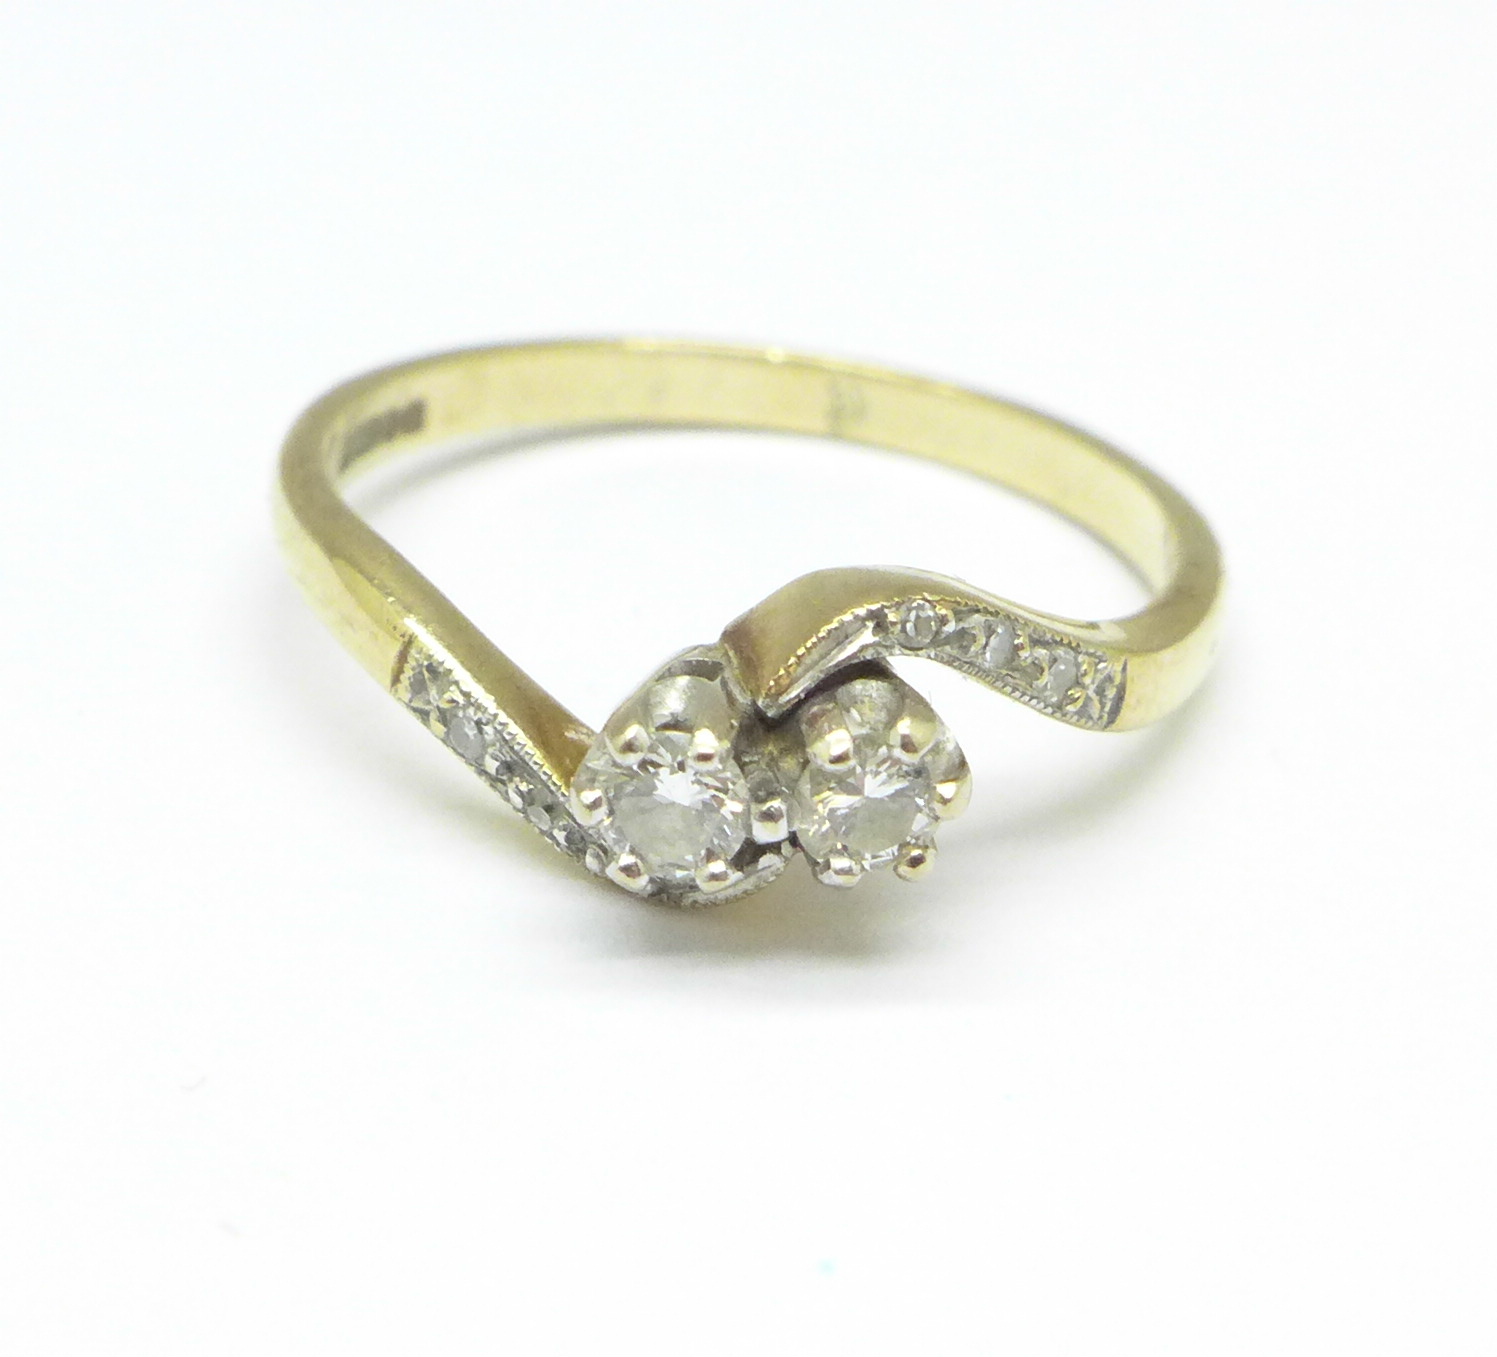 A 9ct gold, two stone diamond crossover ring with diamond shoulders, 2.